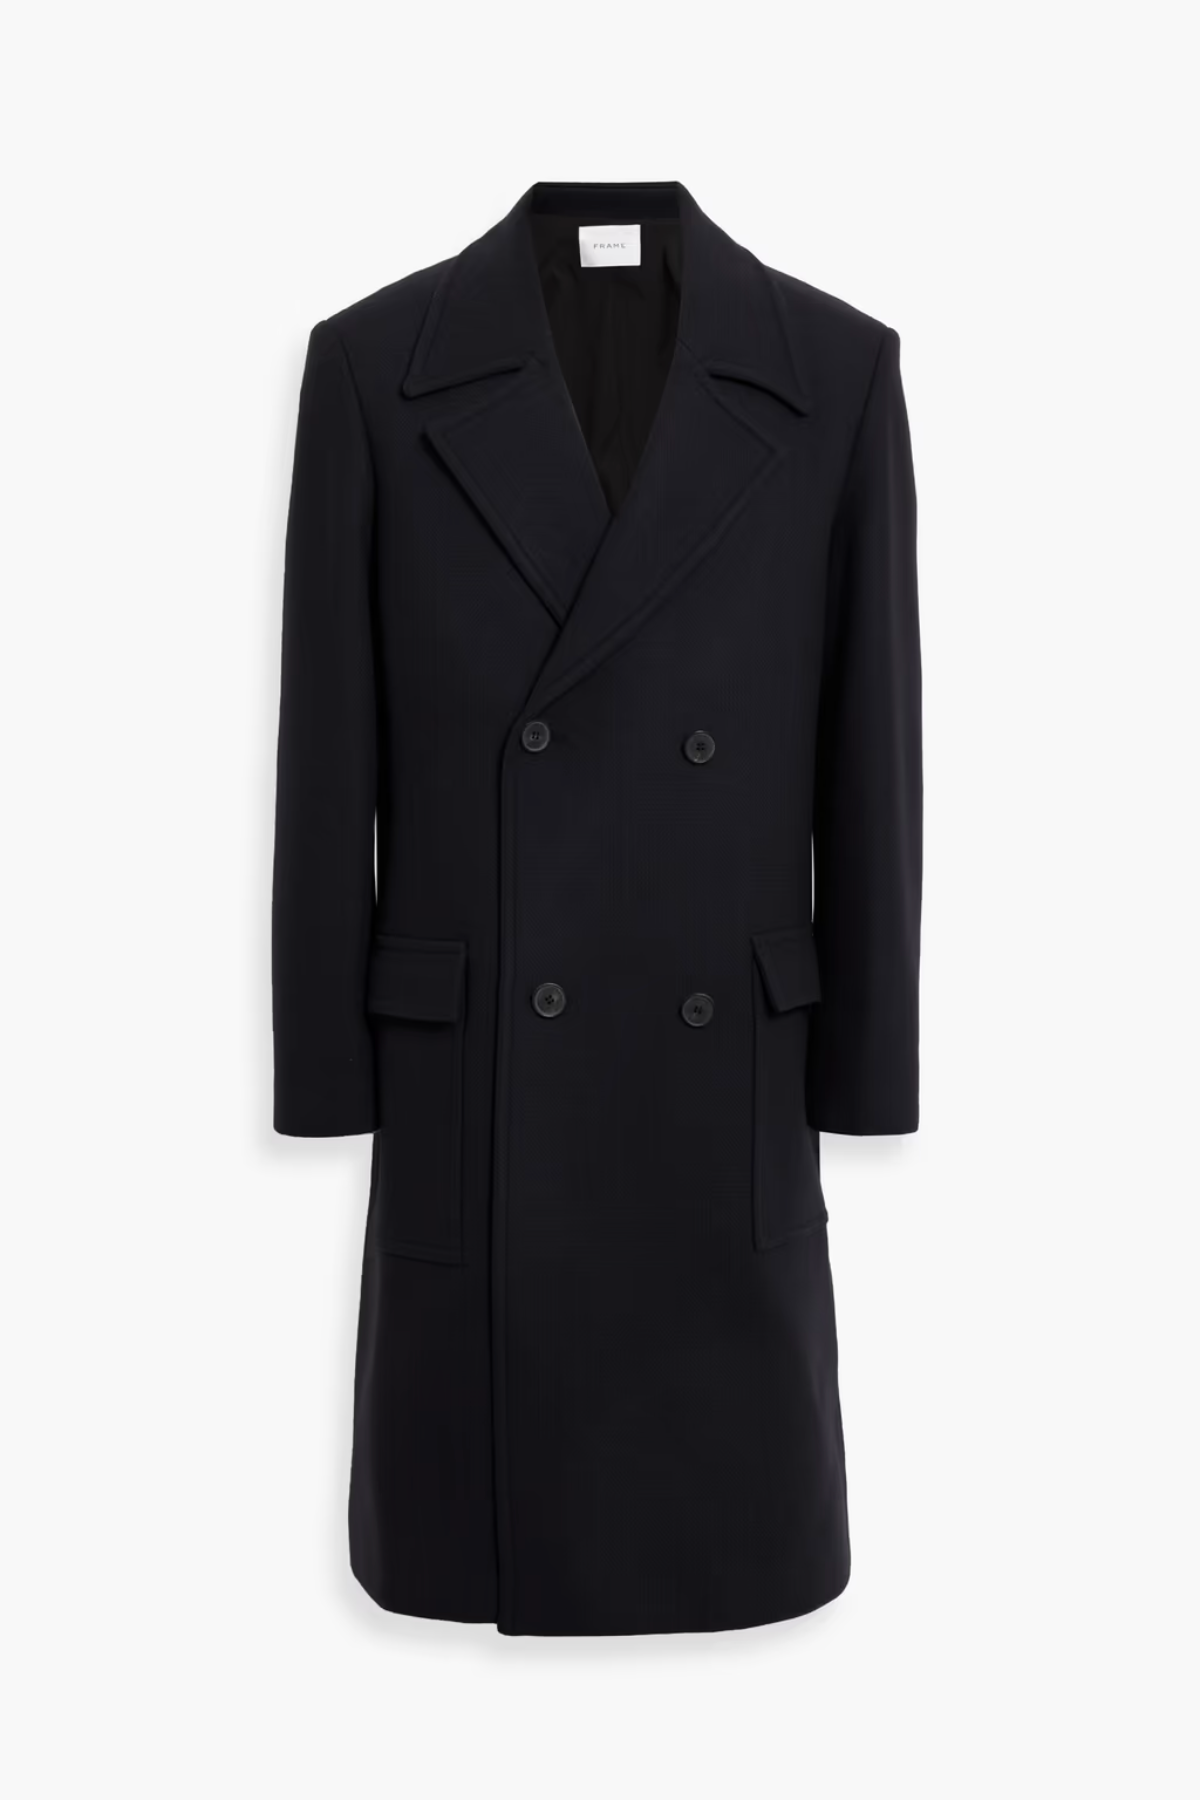 FRAME DOUBLE BREASTED COAT RENTAL